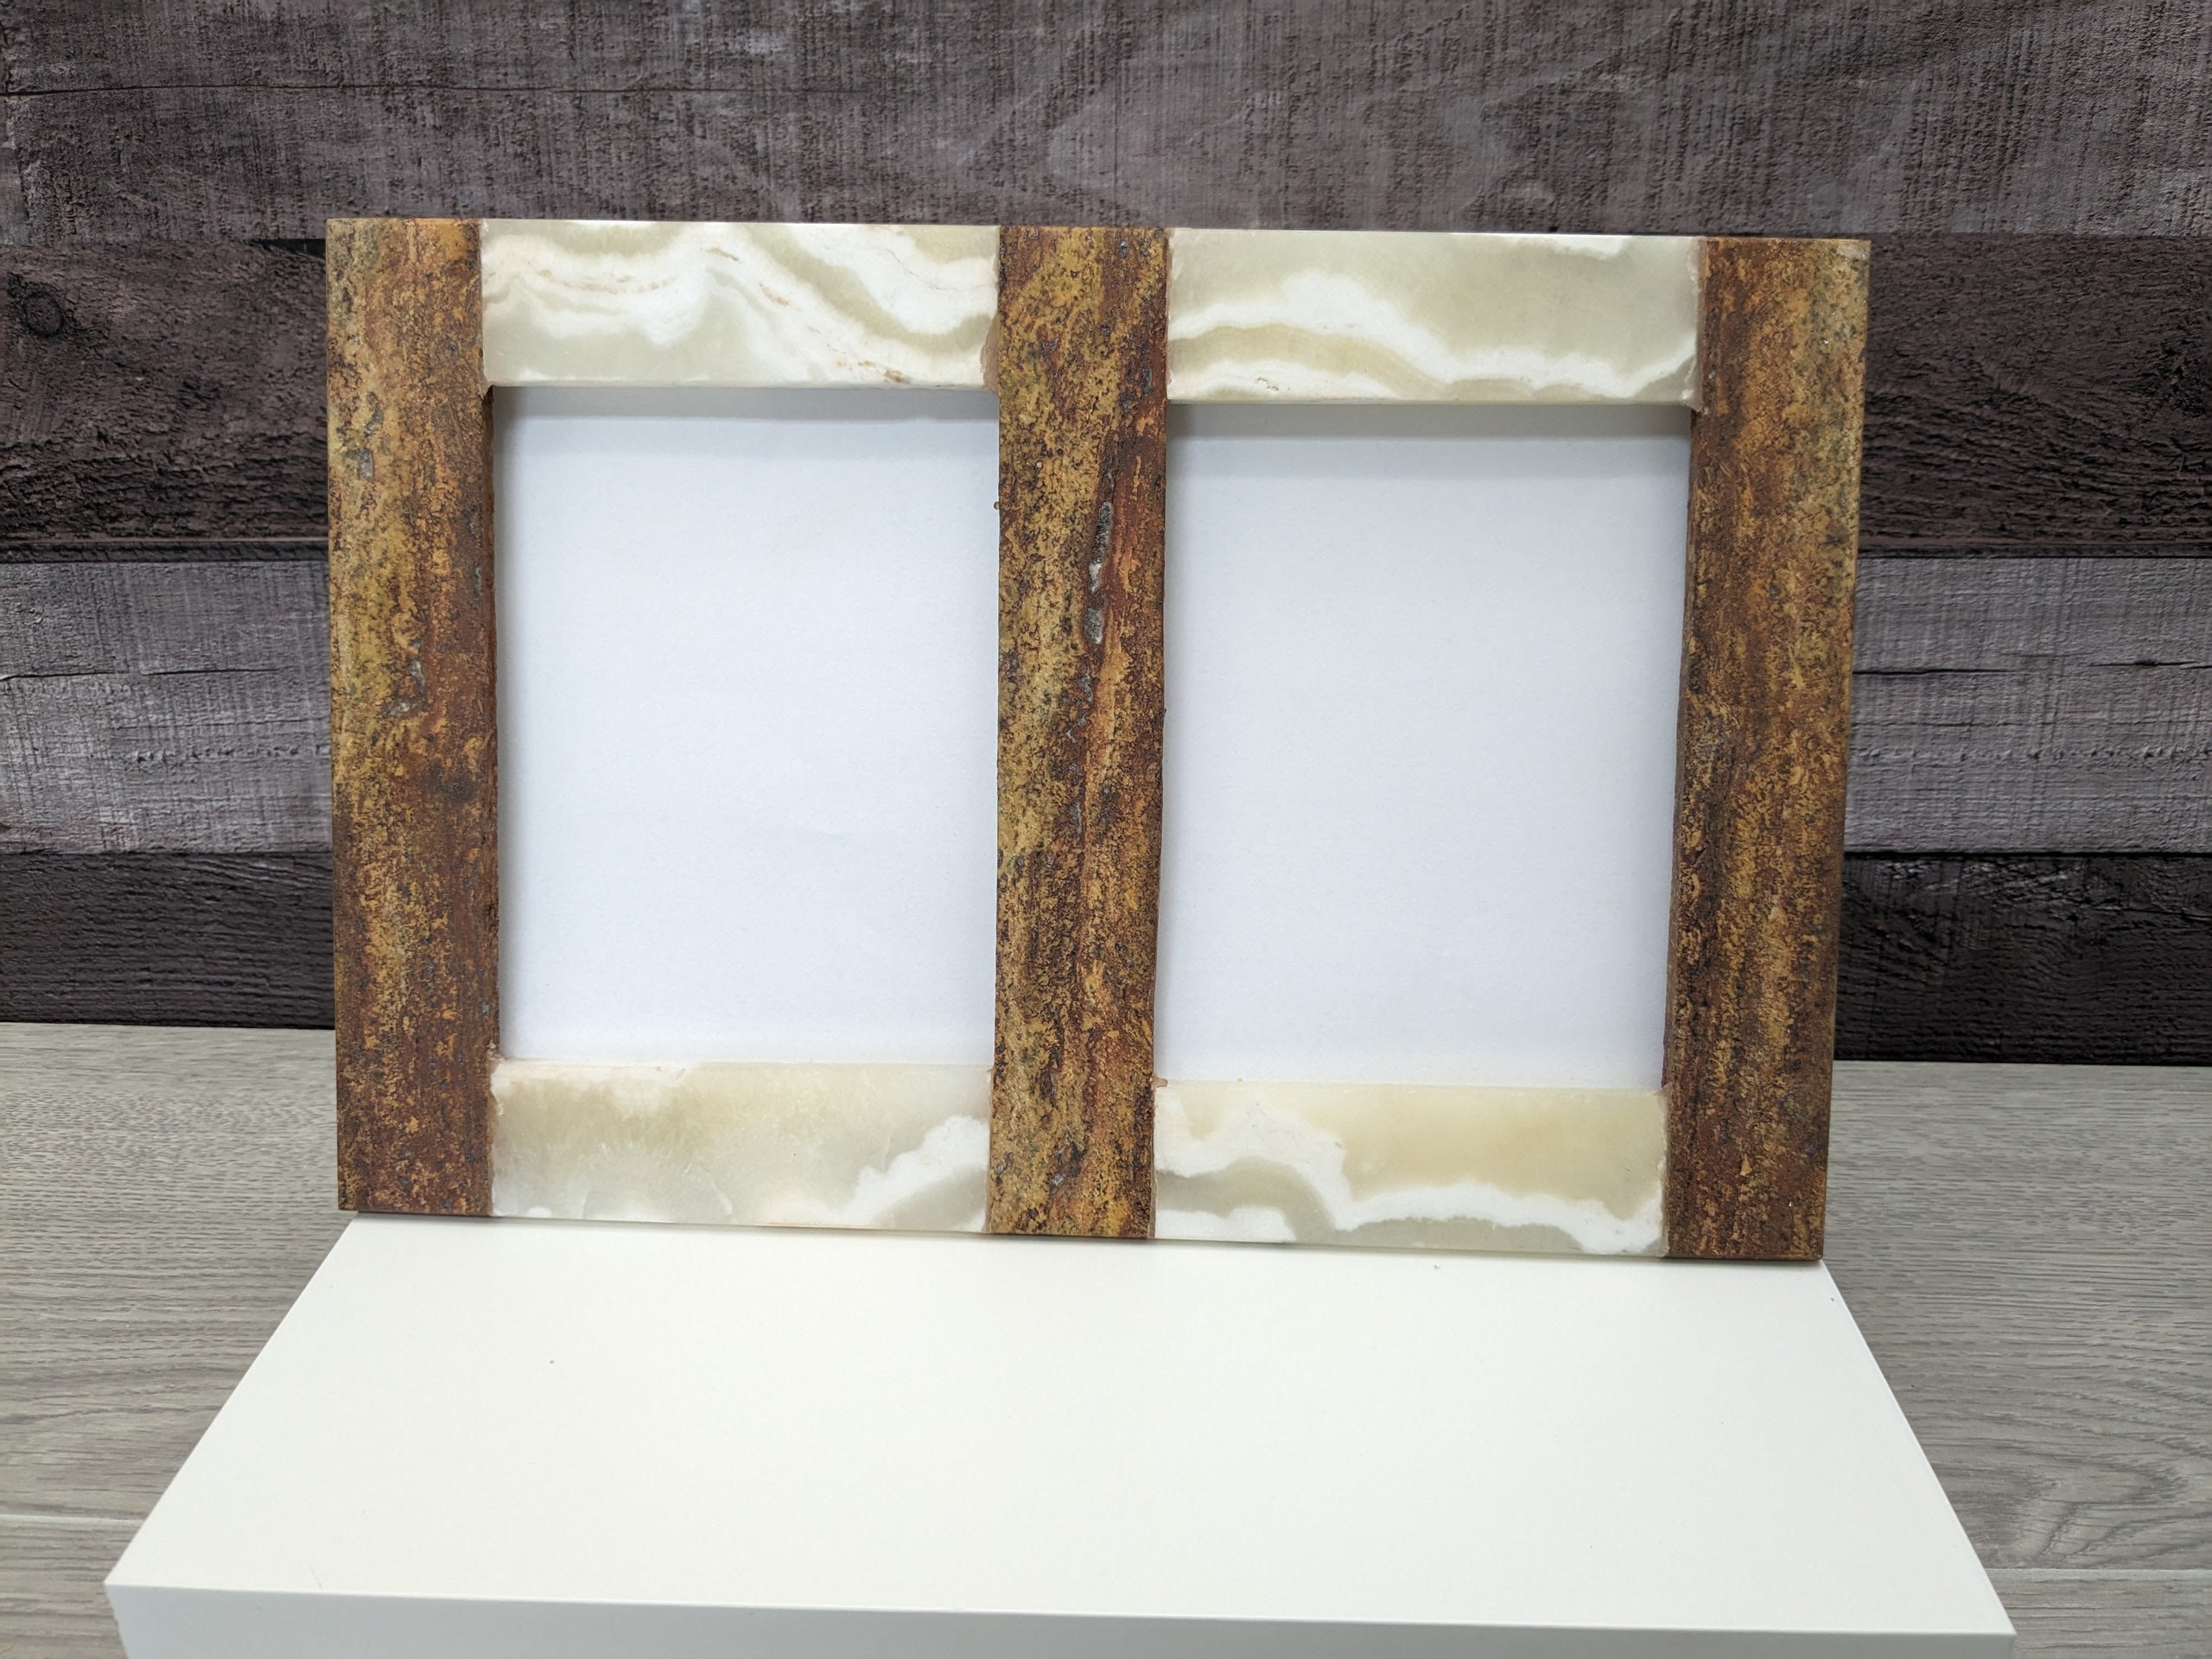 Onyx and Travertine Stone Double Frame. Handmade in Mexico. We package and ship from the USA. Buy now at www.felipeandgrace.com.